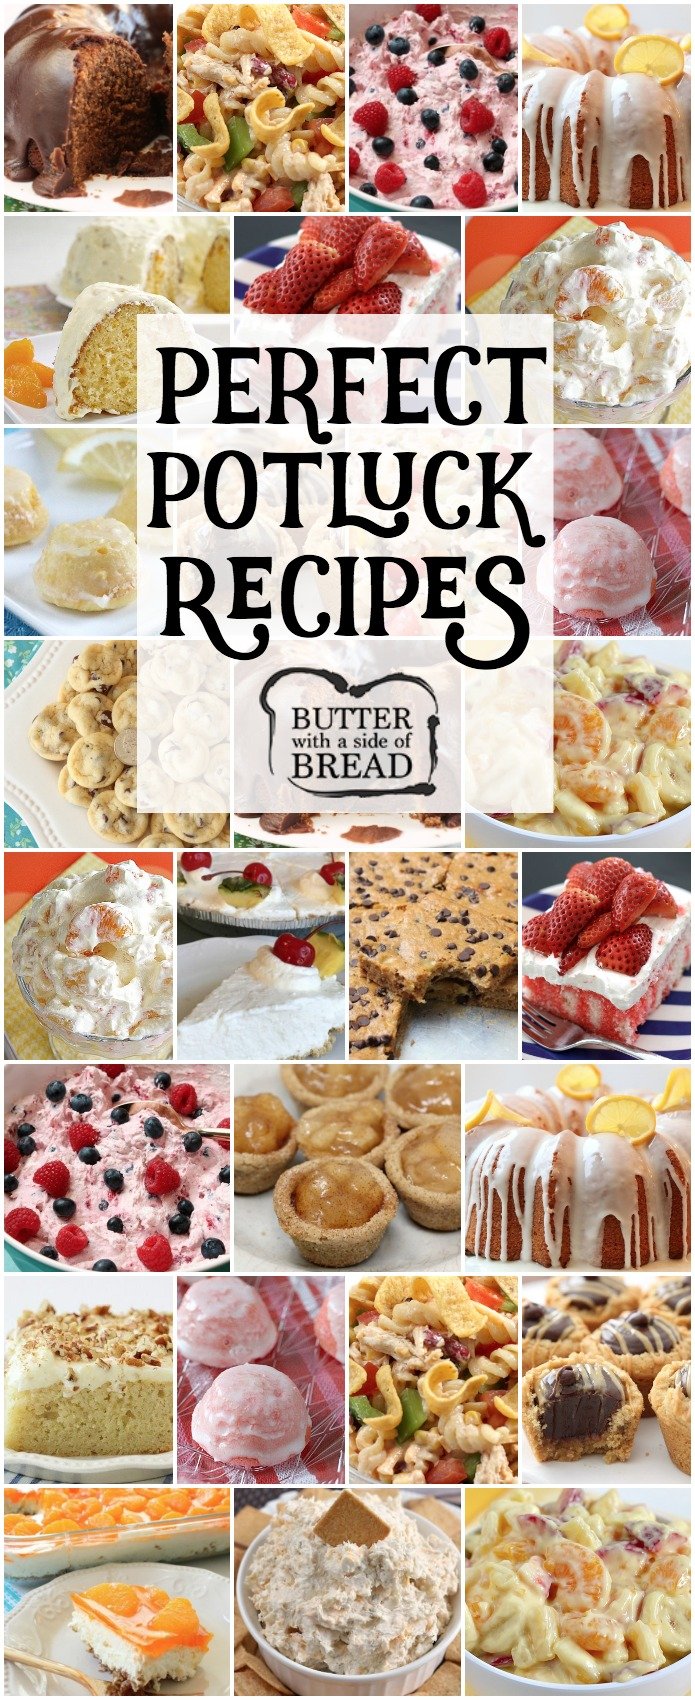 BEST POTLUCK RECIPES all in one place! Includes our popular recipes for Fiesta Ranch Chicken Pasta Salad, Lemon Cake Drops, Chocolate Chip Banana Bars, Orange Cream Fruit Salad and more. Perfect recipes for planning your next potluck dinner.